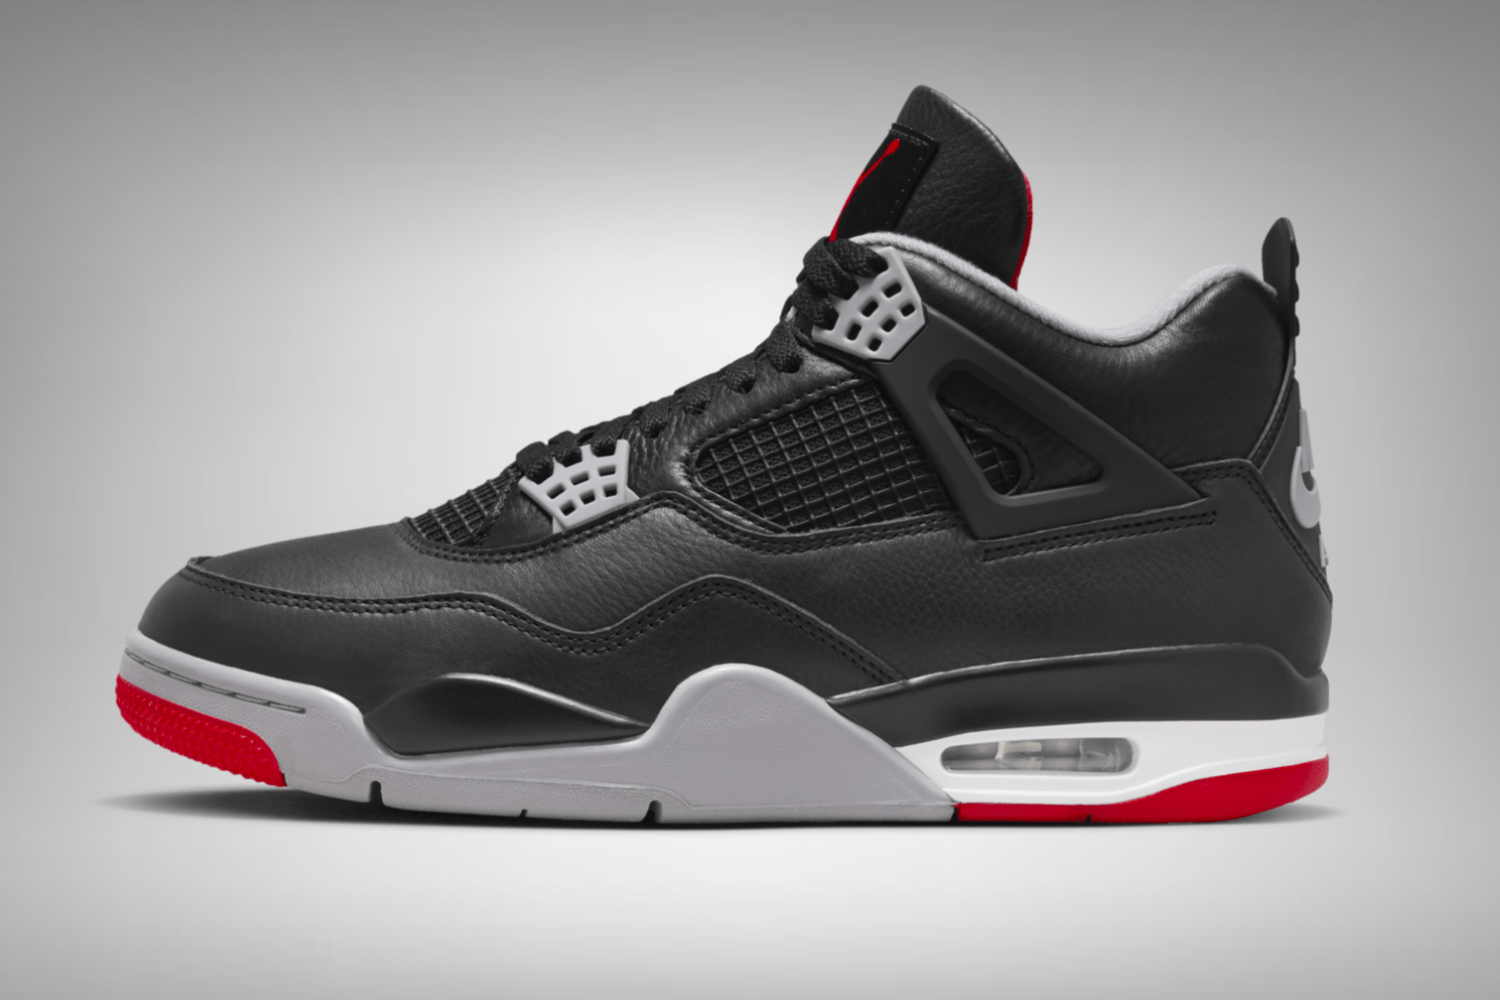 Official images of the Air Jordan 4 'Bred Reimagined'